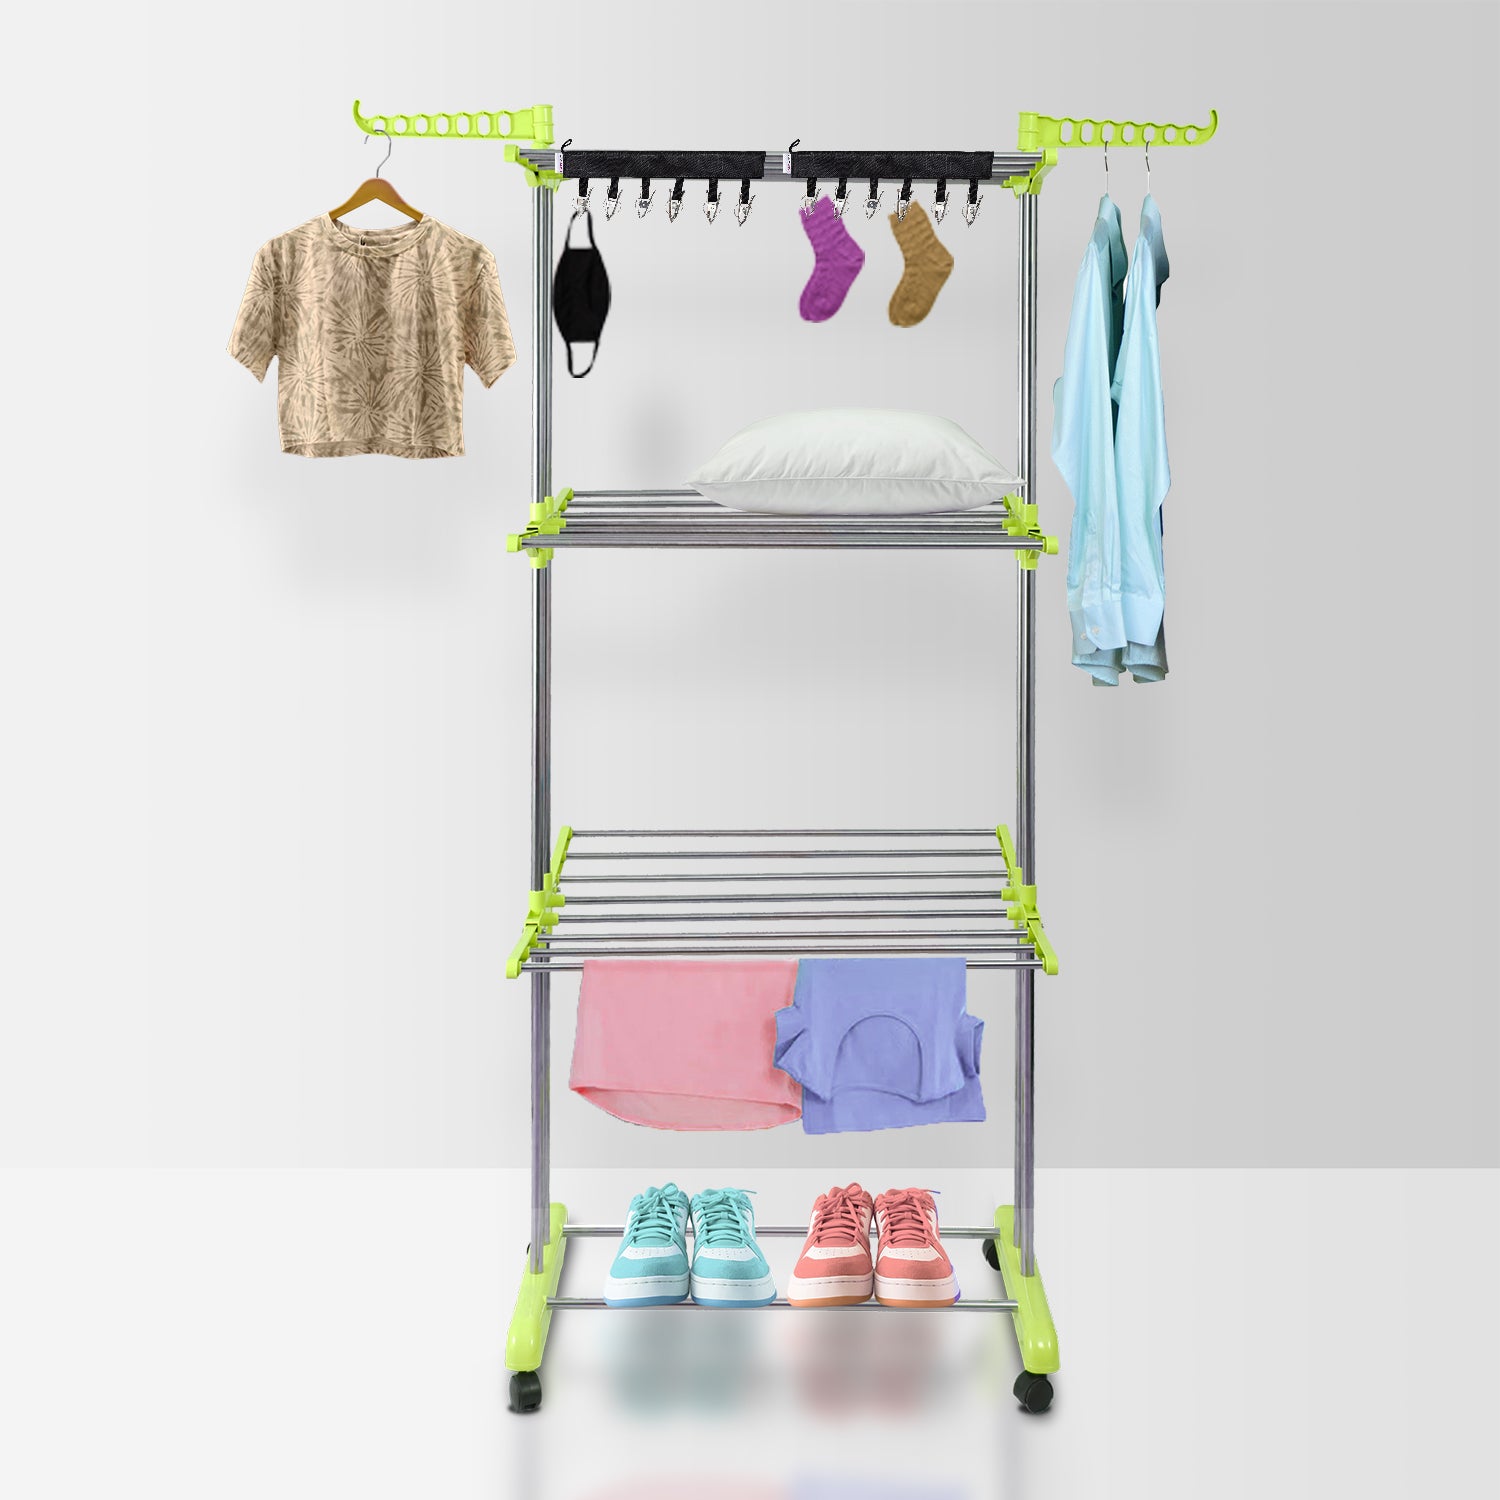 LivingBasics® Heavy Duty Rust-free Double Pole Clothes Drying Racks with Wheels for Indoor/Outdoor/Balcony (COMBO Products LIME  GREEN+ ICON CLOTH CLIP)(ABS PLASTIC)